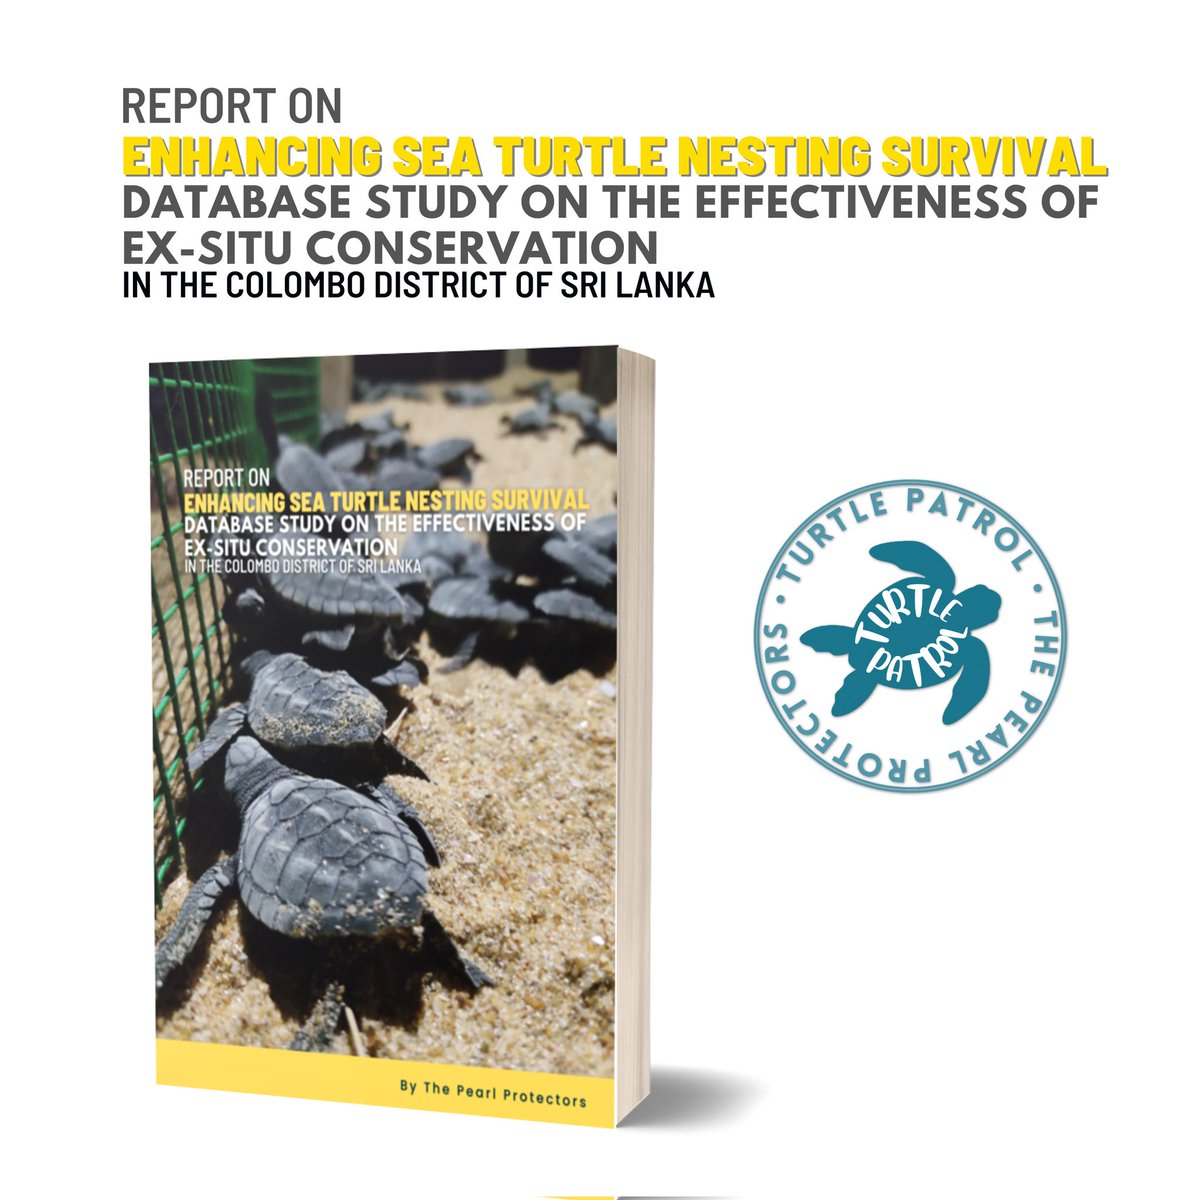 New Publication Announcement 📚 Report on Enhancing Sea Turtle Nesting Survival Database Study on the Effectiveness of Ex-situ Conservation in the Colombo District of Sri Lanka, is now available for public viewing through our website pearlprotectors.org/publications #TurtlePatrol #report